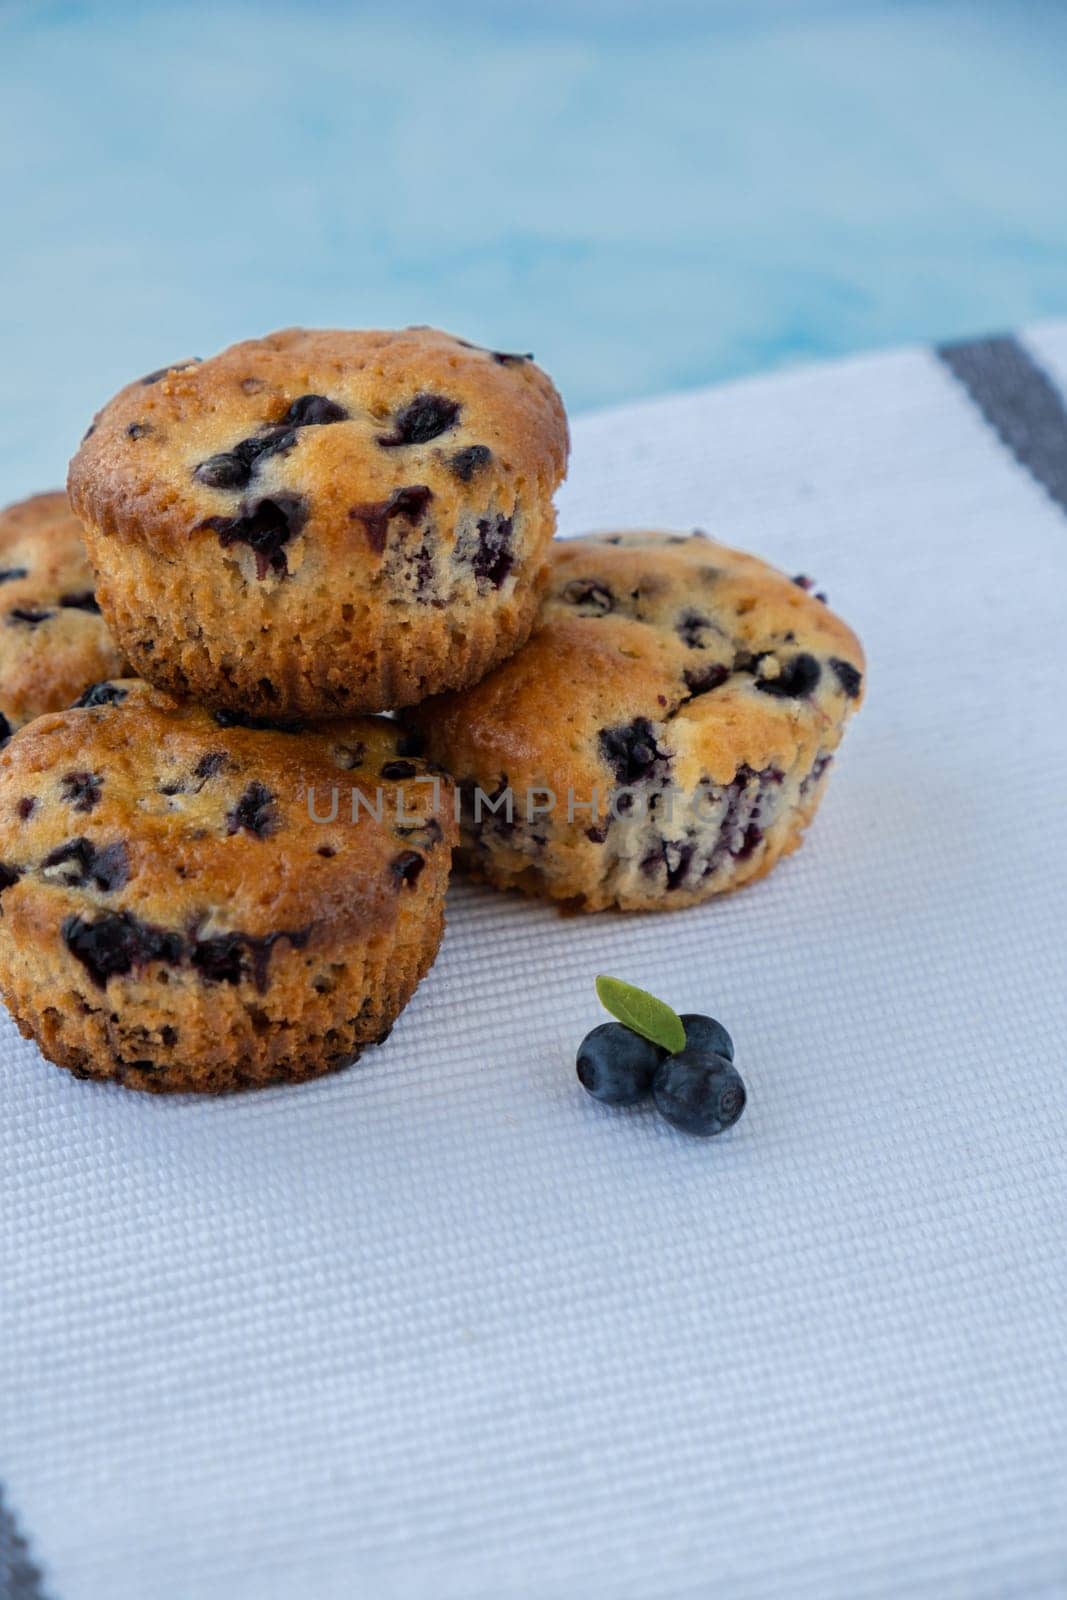 Homemade baked fresh blueberry muffins. Tasty pastry sweet cupcake dessert. Berry pie cupcakes with organic berries. Gluten free healthcare recipe from alternative flour by anna_stasiia